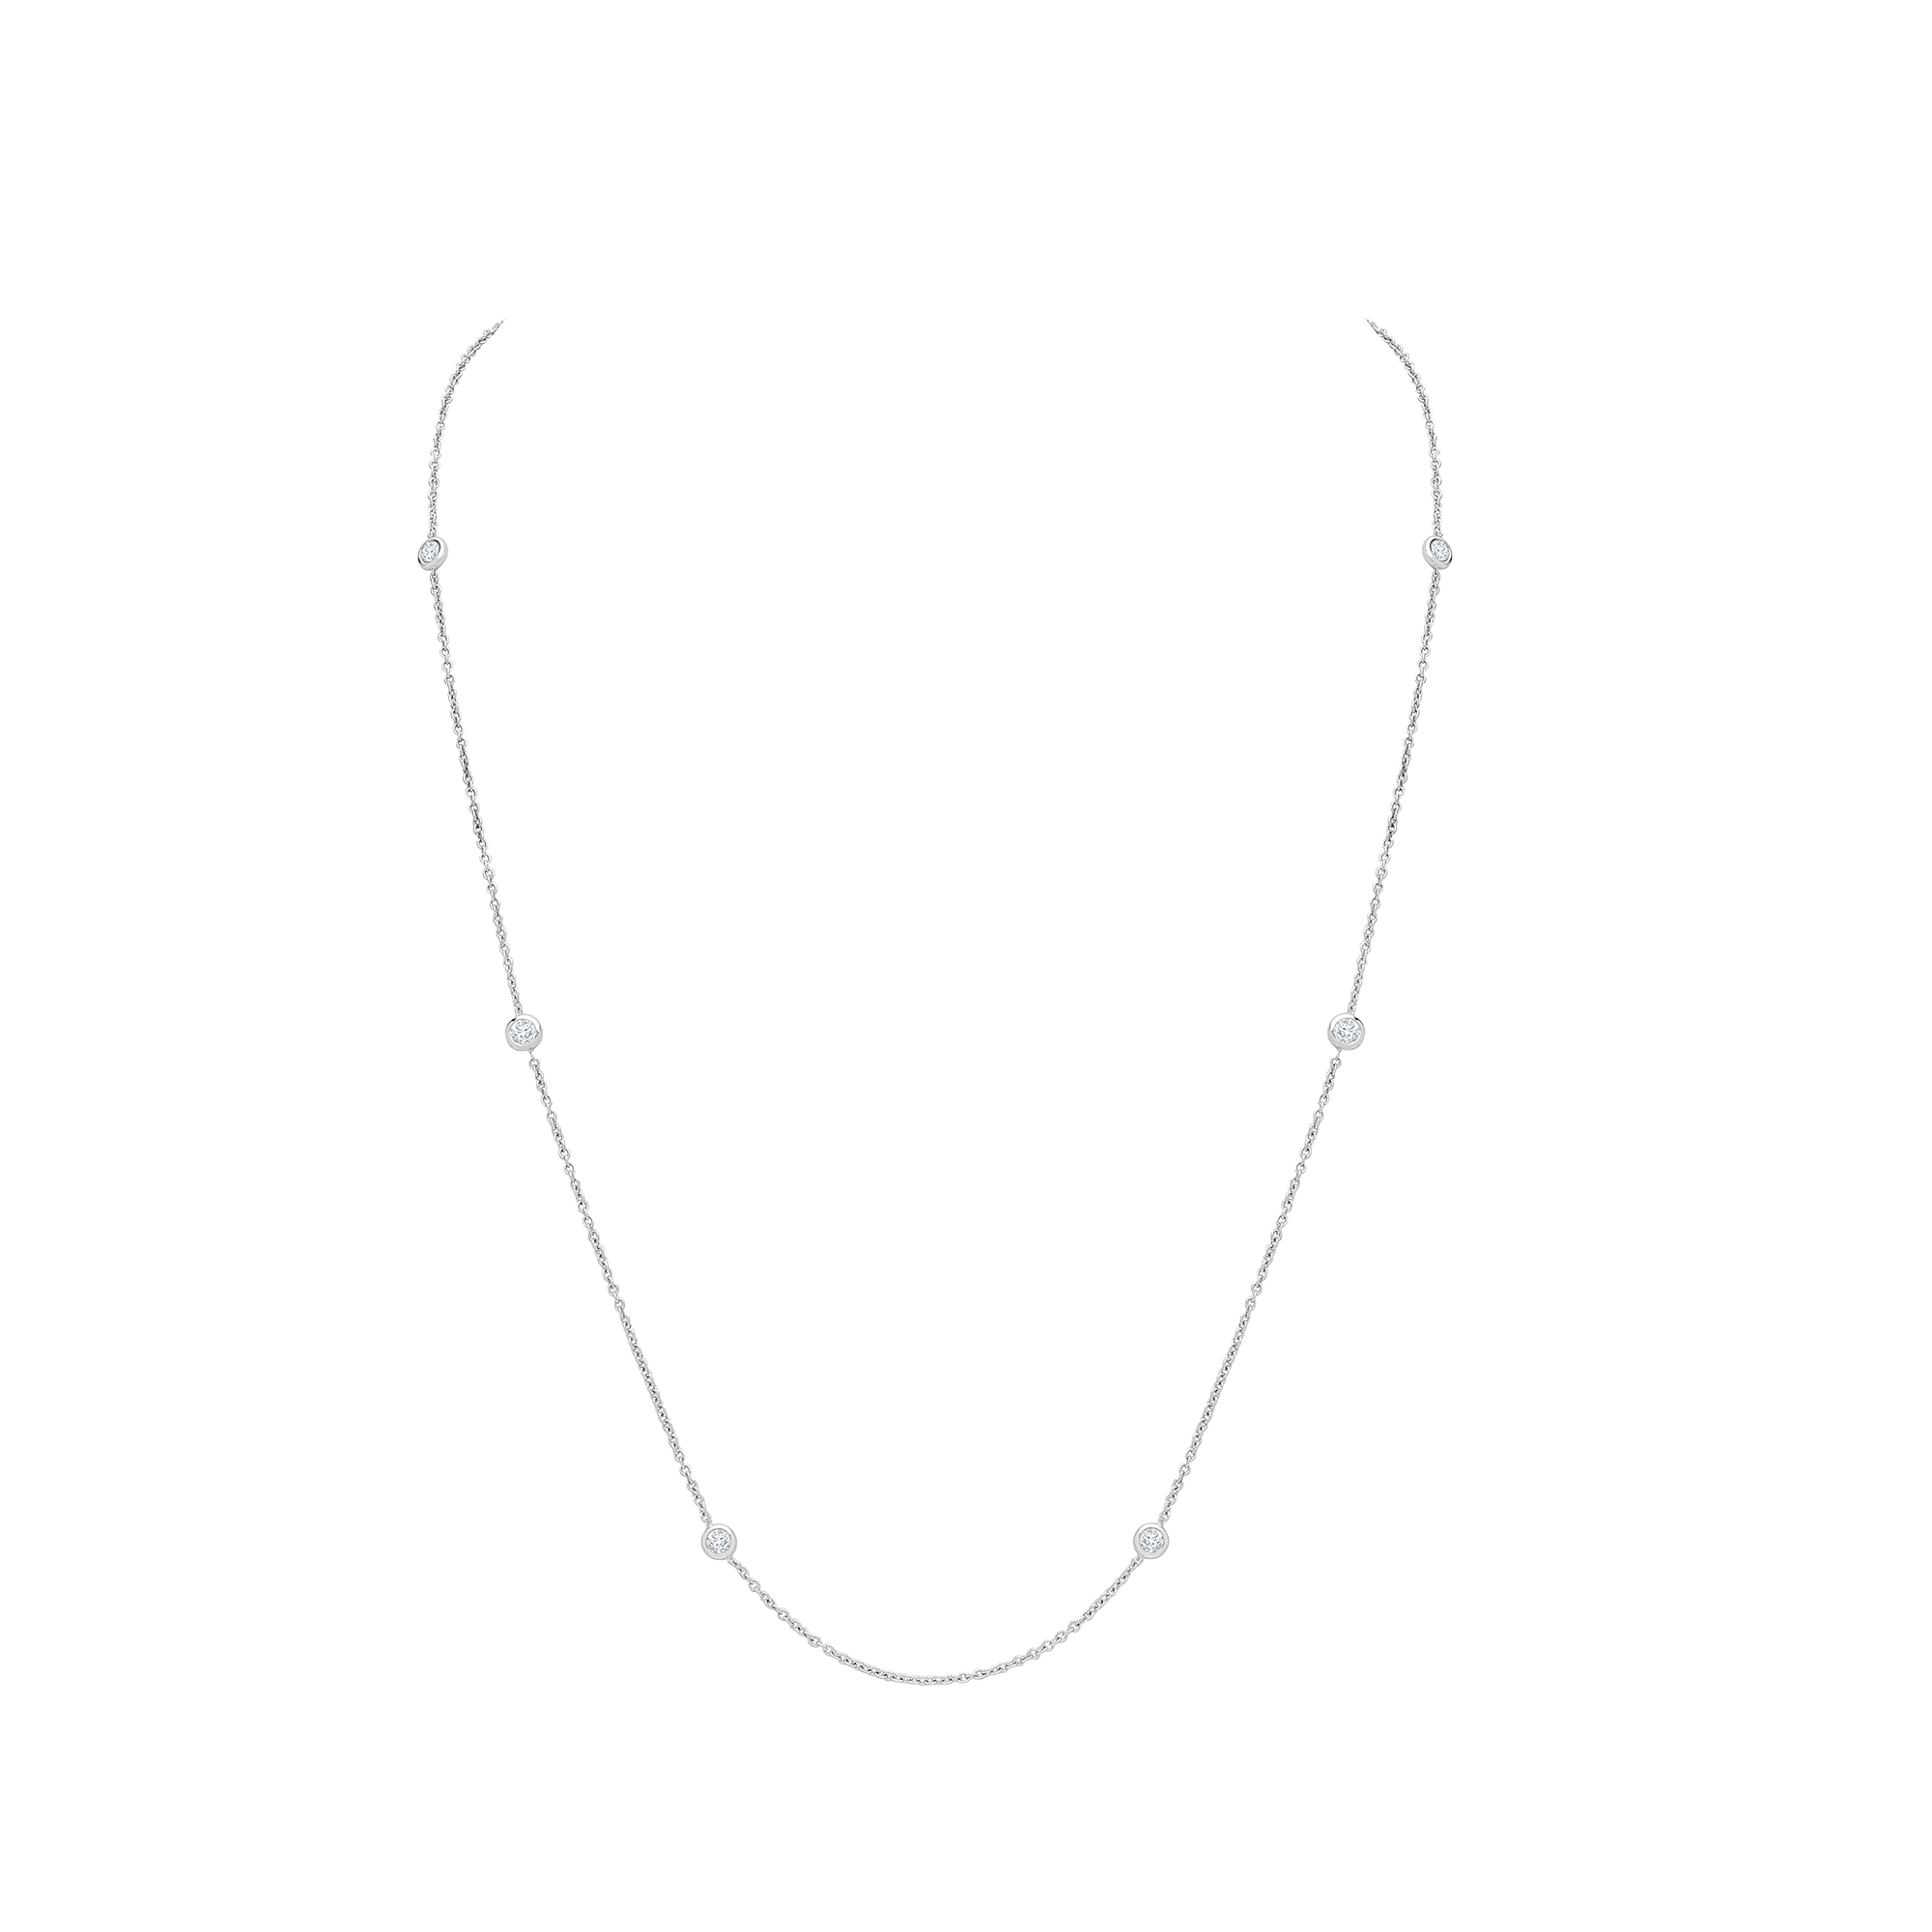 0.15 Carat Certified Round Natural Diamond Chain Necklace